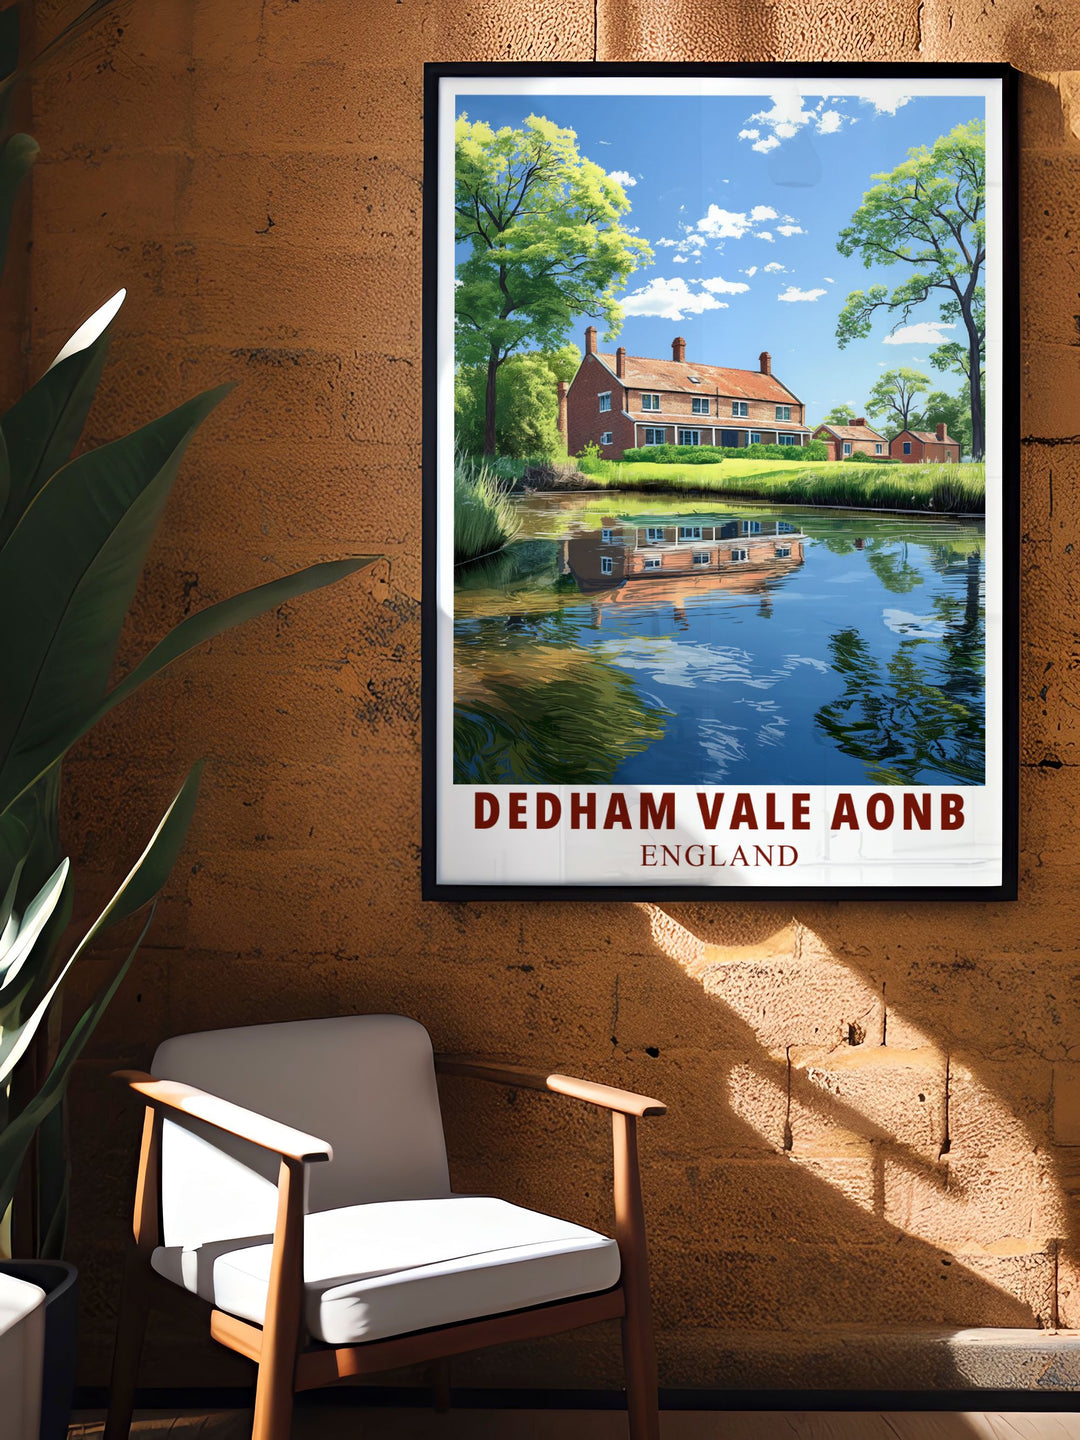 Vintage poster highlighting the artistic heritage of Dedham Vale, featuring the landscapes that inspired John Constables most famous works.